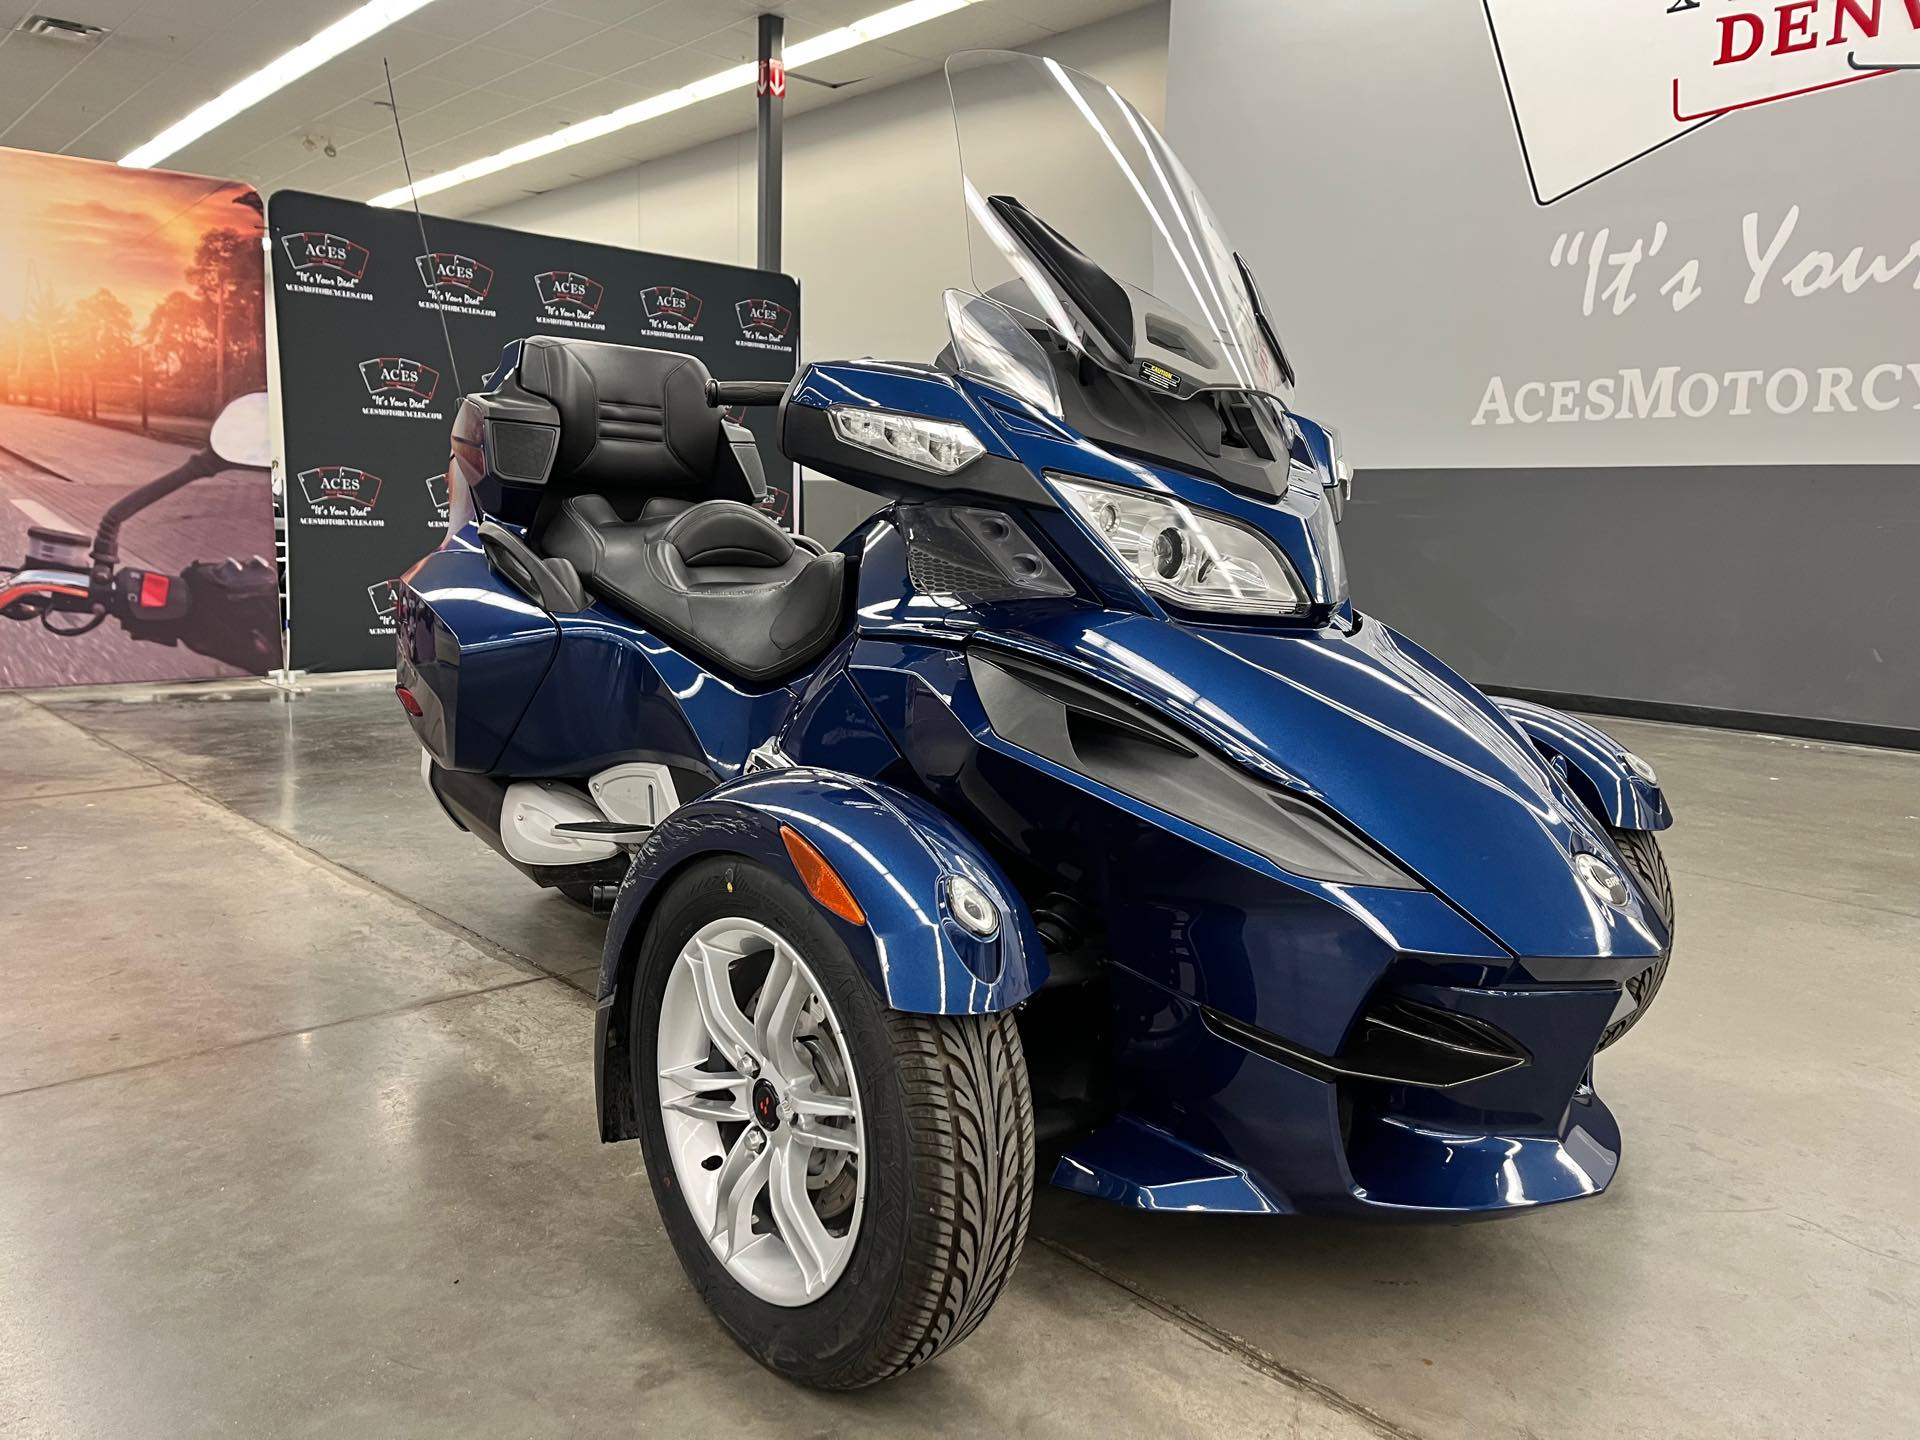 2011 Can-Am Spyder Roadster RT at Aces Motorcycles - Denver